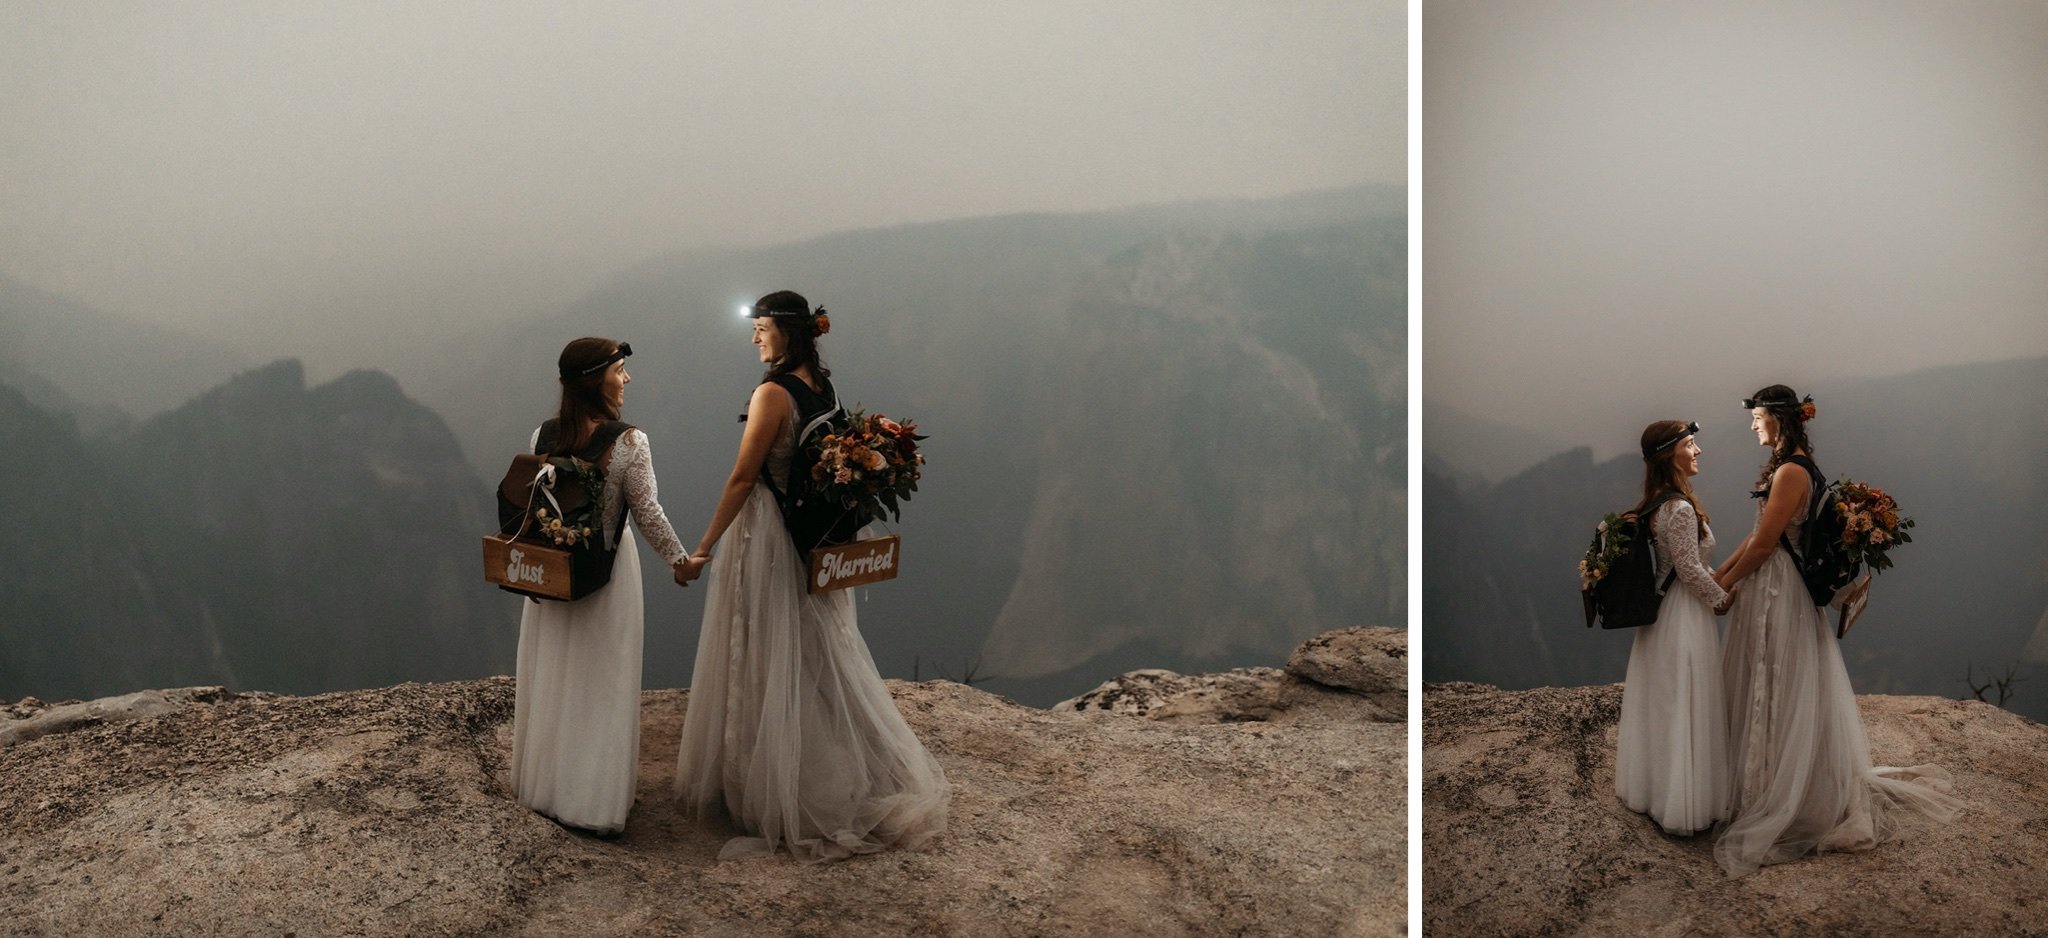 Yosemite National Park Elopement with Two Brides-Will Khoury55.jpg